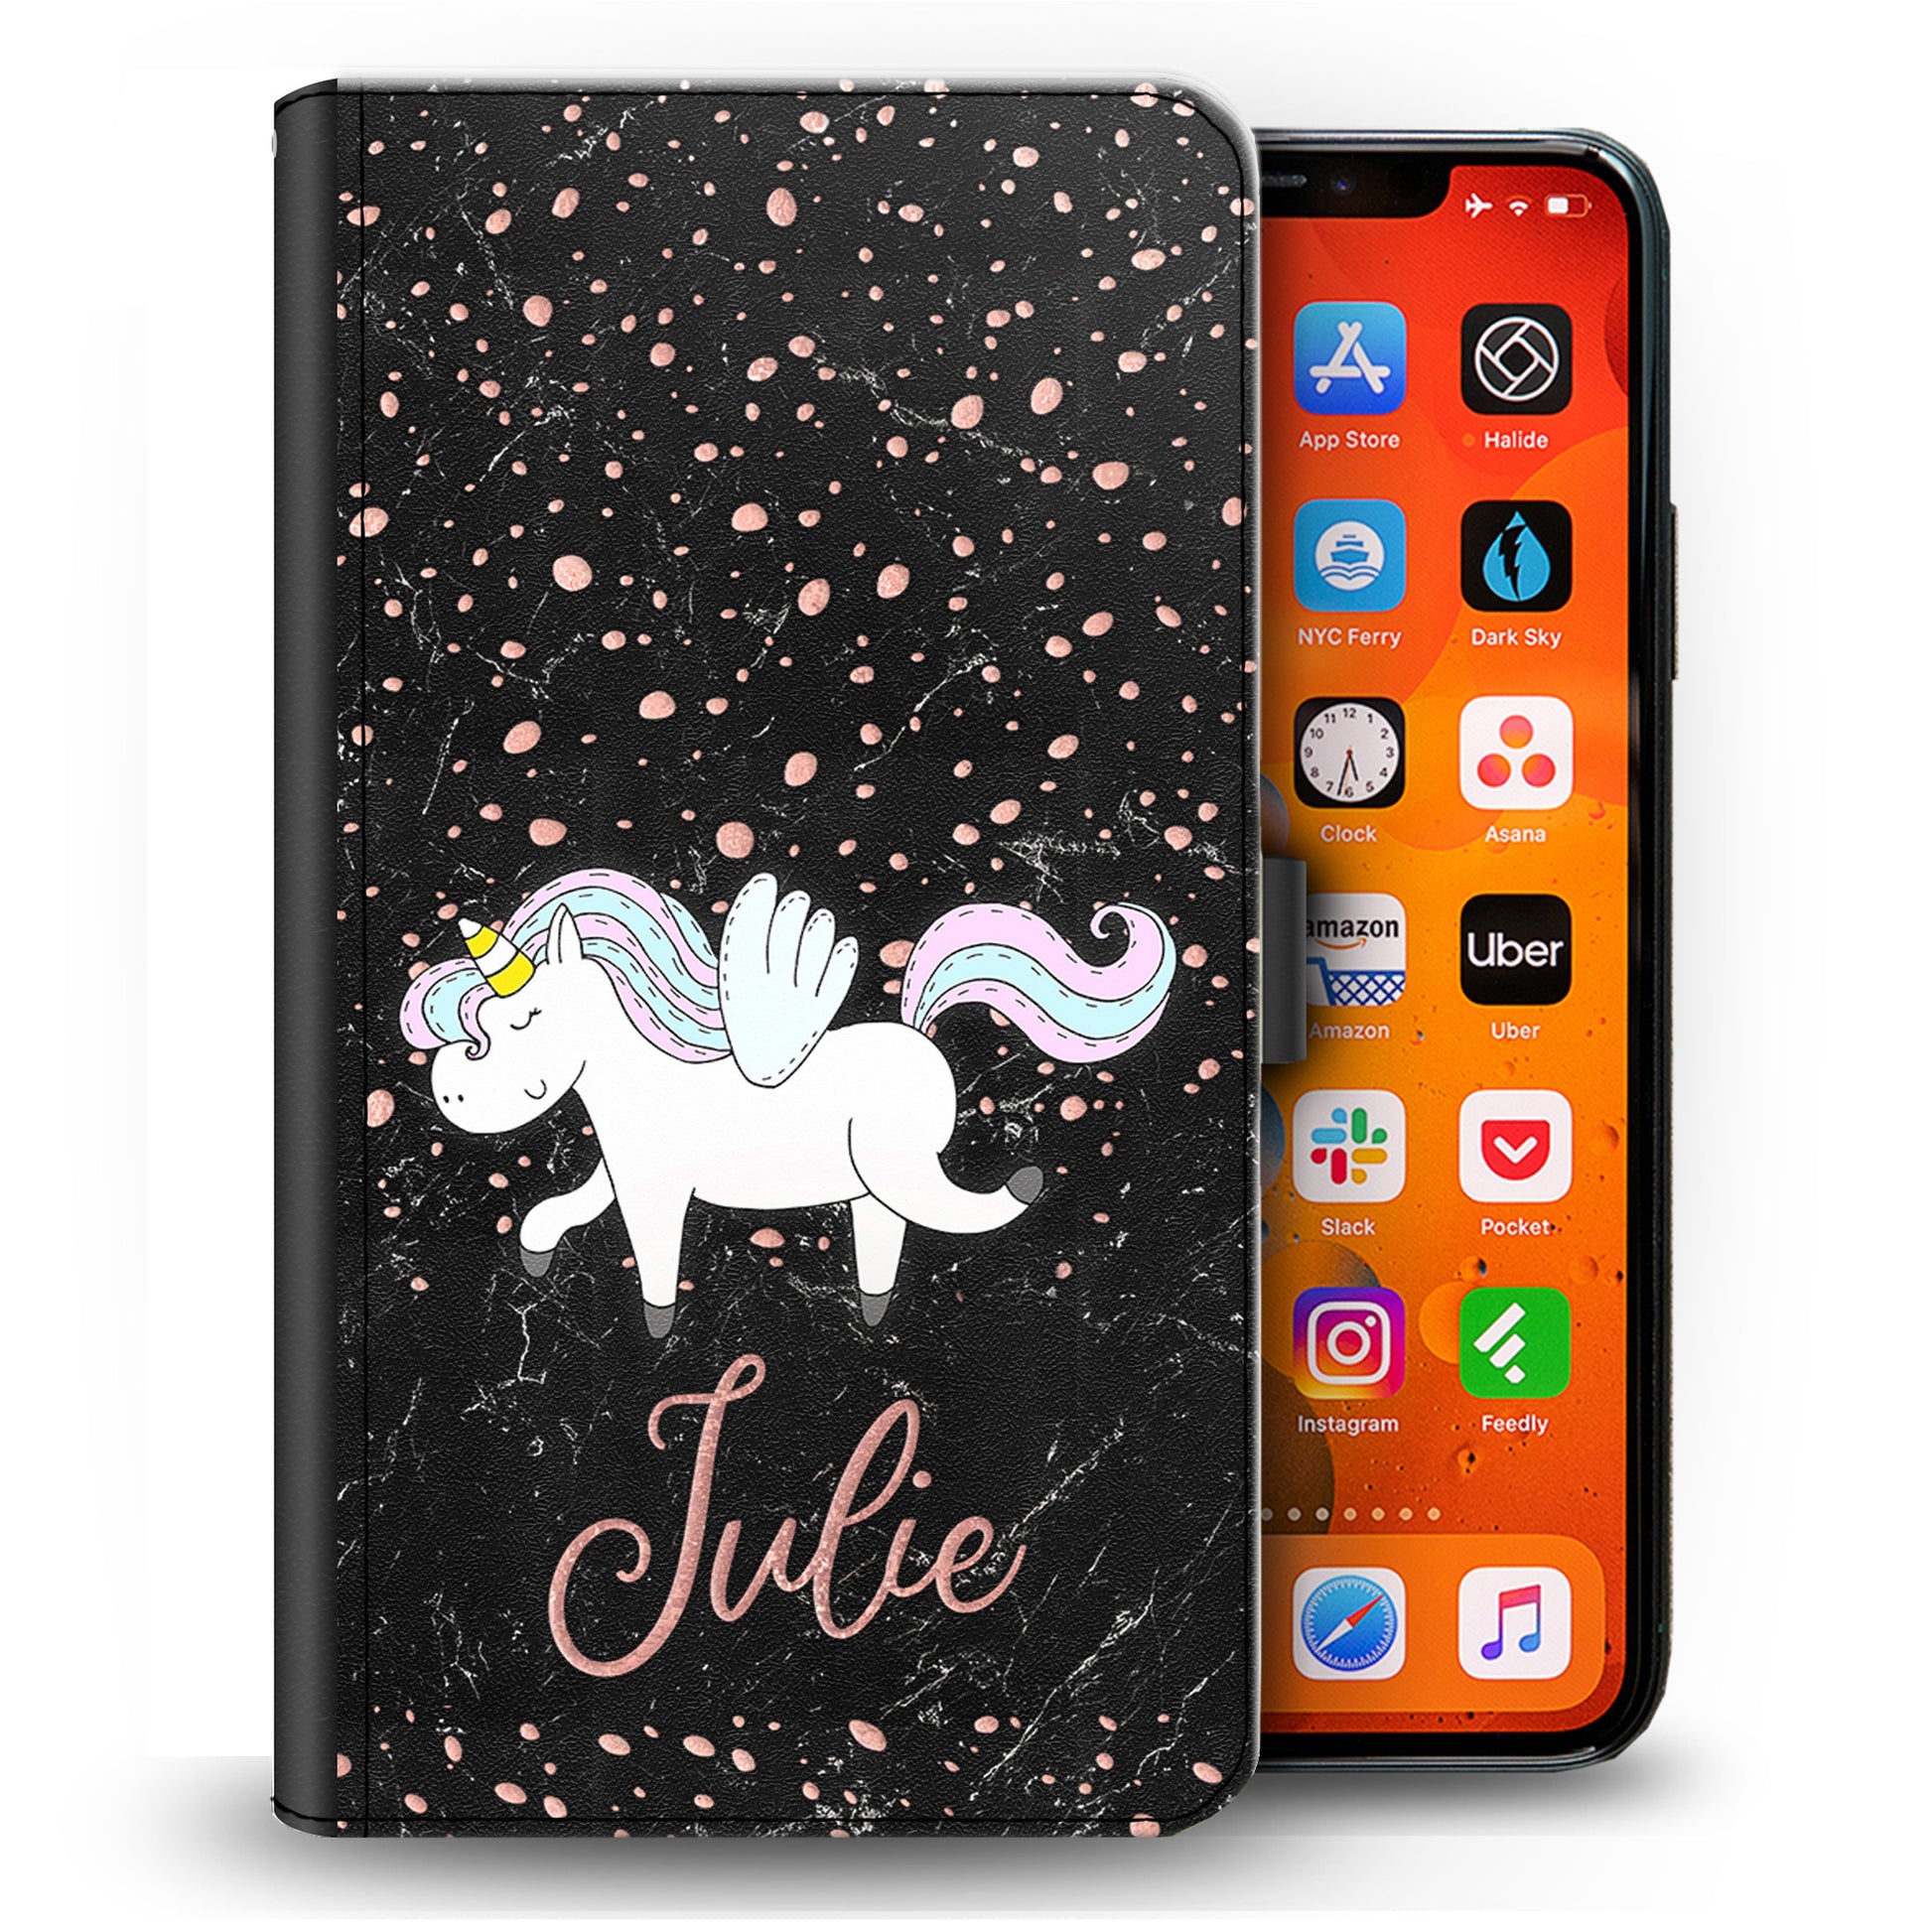 Personalised Huawei Phone Leather Wallet with Winged Unicorn and Pink Text on Black Marble 